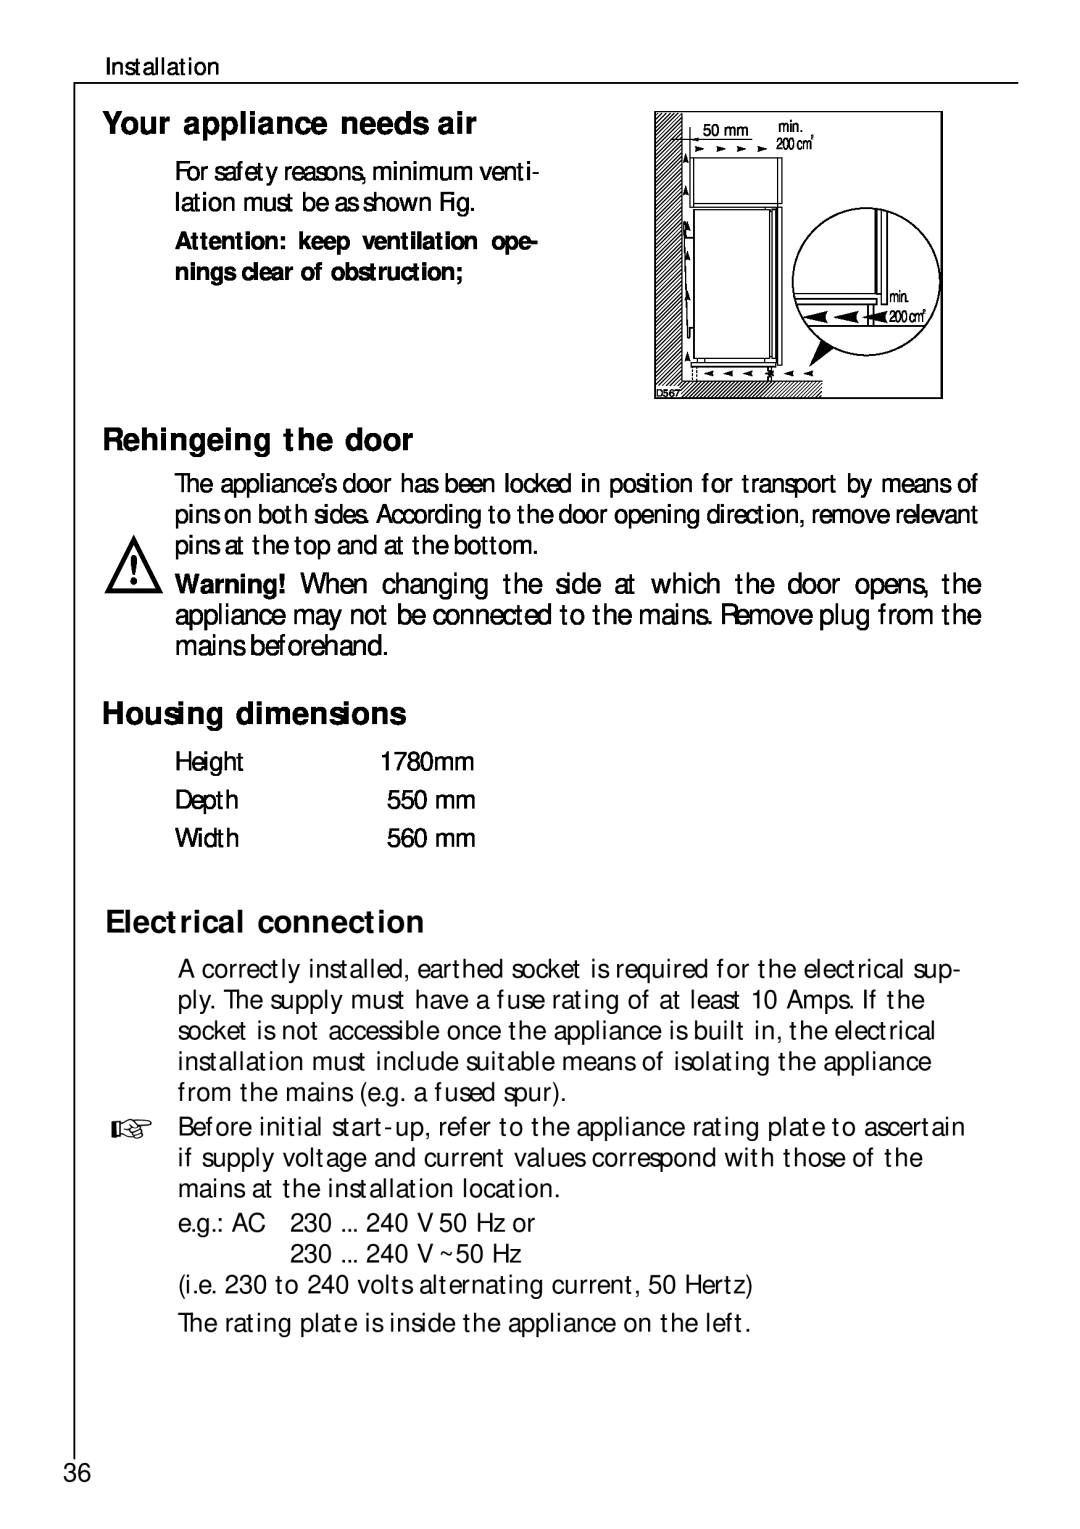 Electrolux Z 9 18 42-4 I Your appliance needs air, Rehingeing the door, Housing dimensions, Electrical connection 